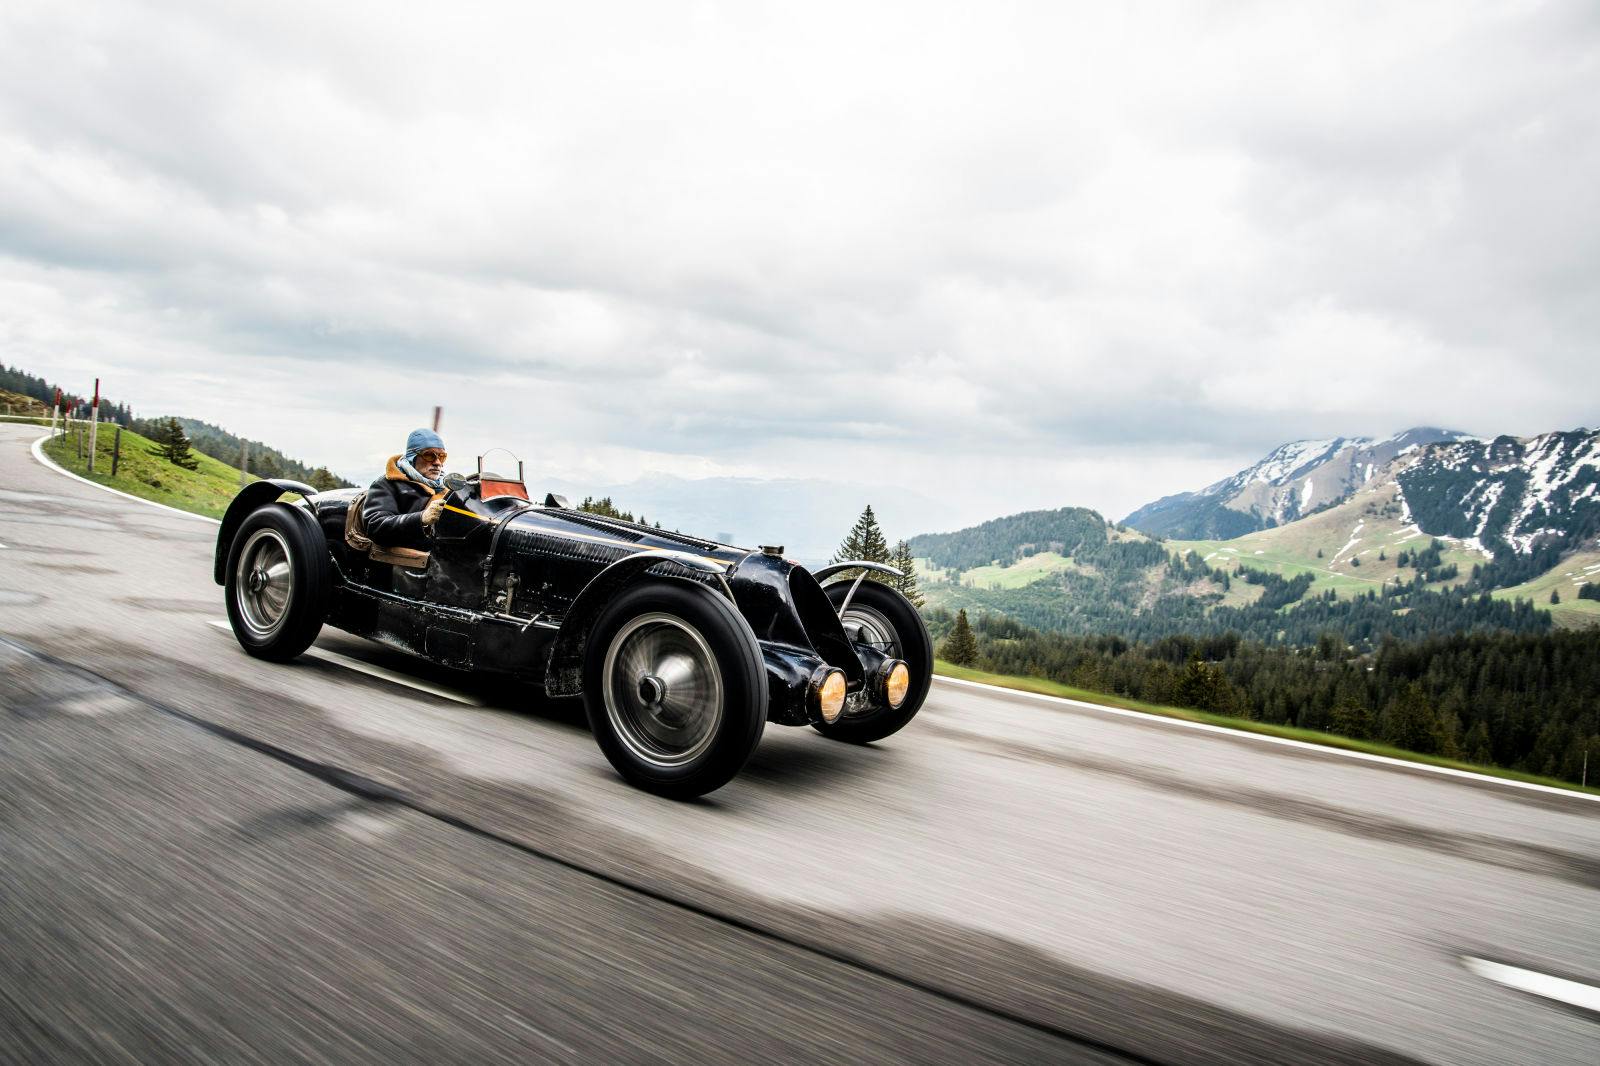 Bugatti Type 59 Sports: an exceptional sports car with a victorious racing history